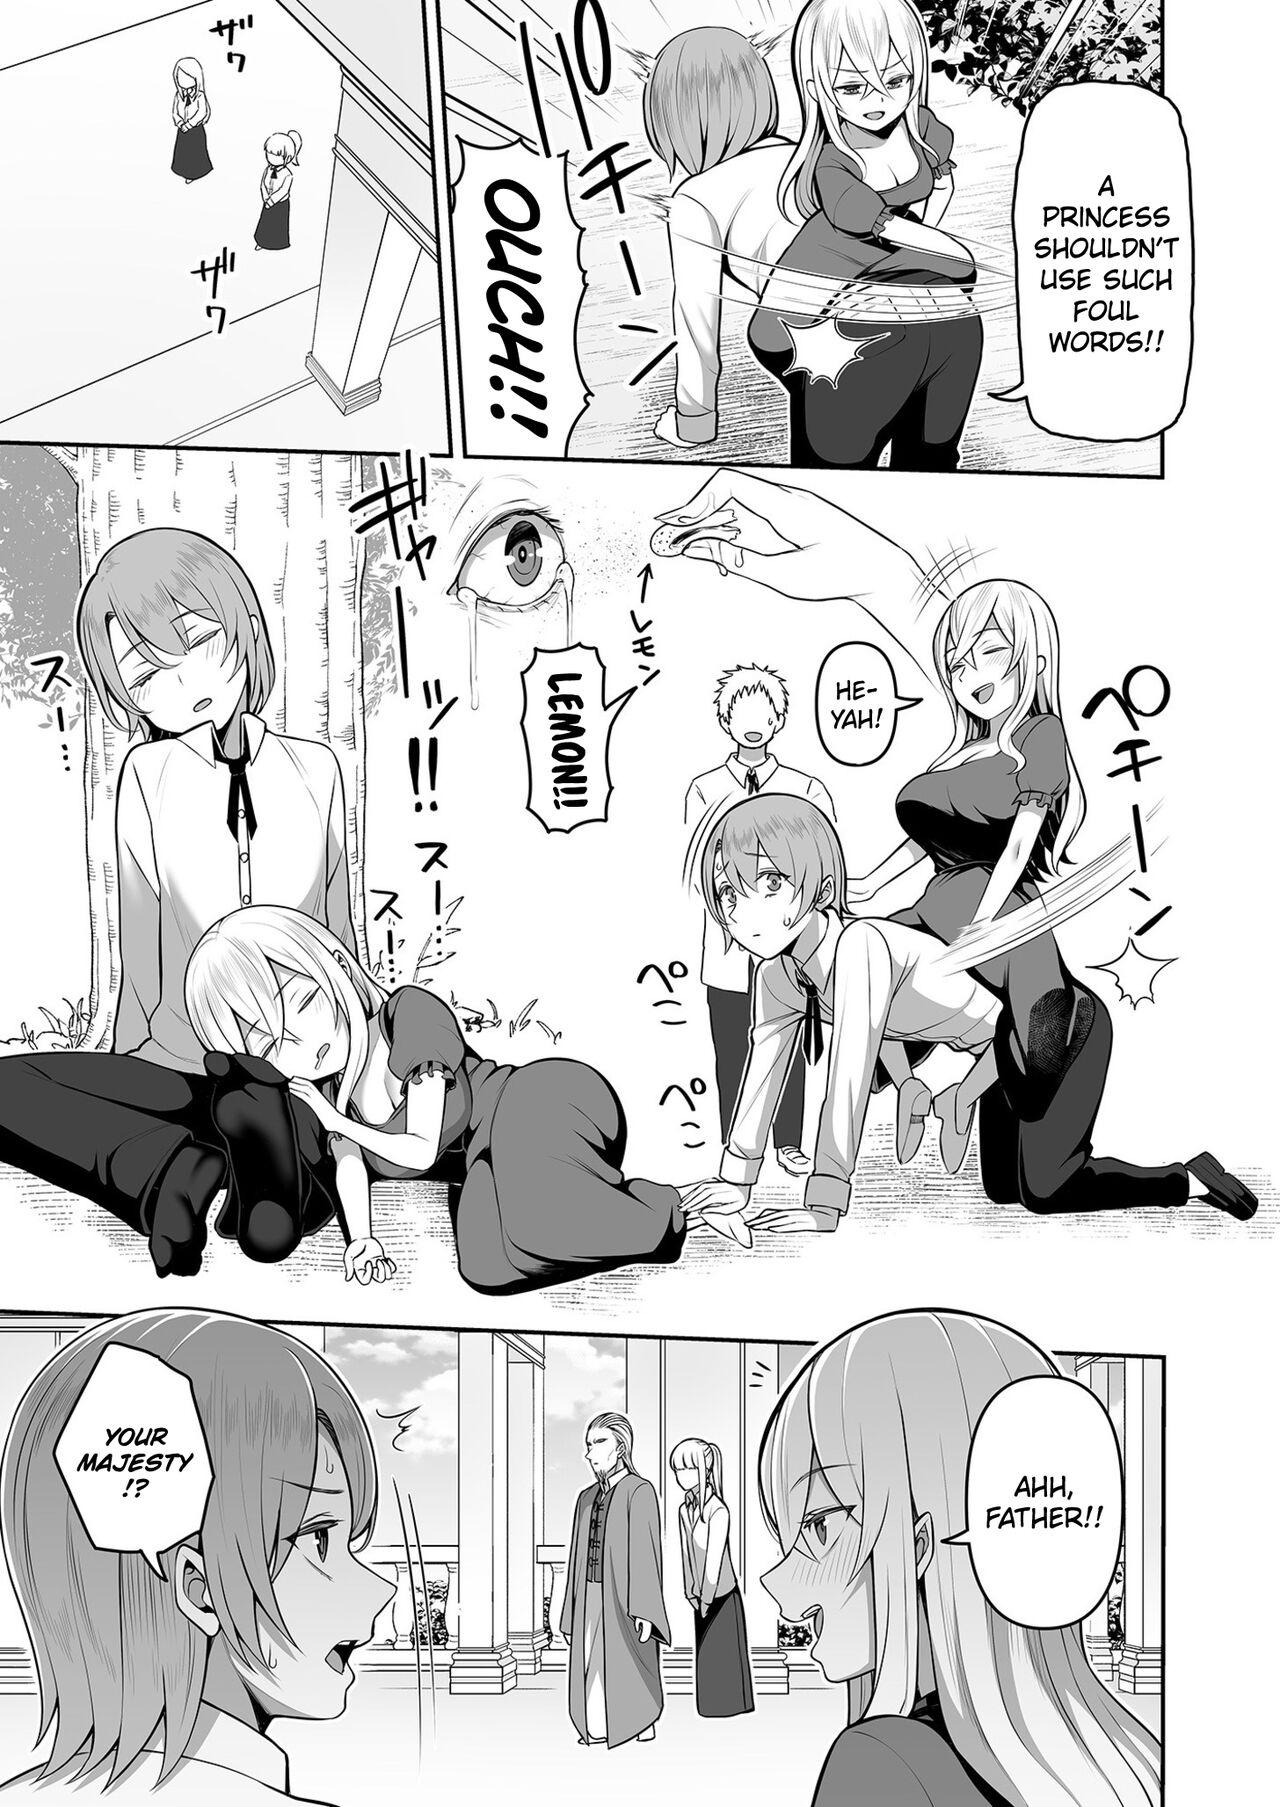 Gay Orgy [Kayumidome] Valerie Monogatari ~Oujo-sama wa Yaritai Houdai!?~ Ch1/ The Story of Valerie ~The Queen Gets To Fuck As Much As She Wants!~ Ch.1 [English] {Doujins.com} Stepsister - Page 5